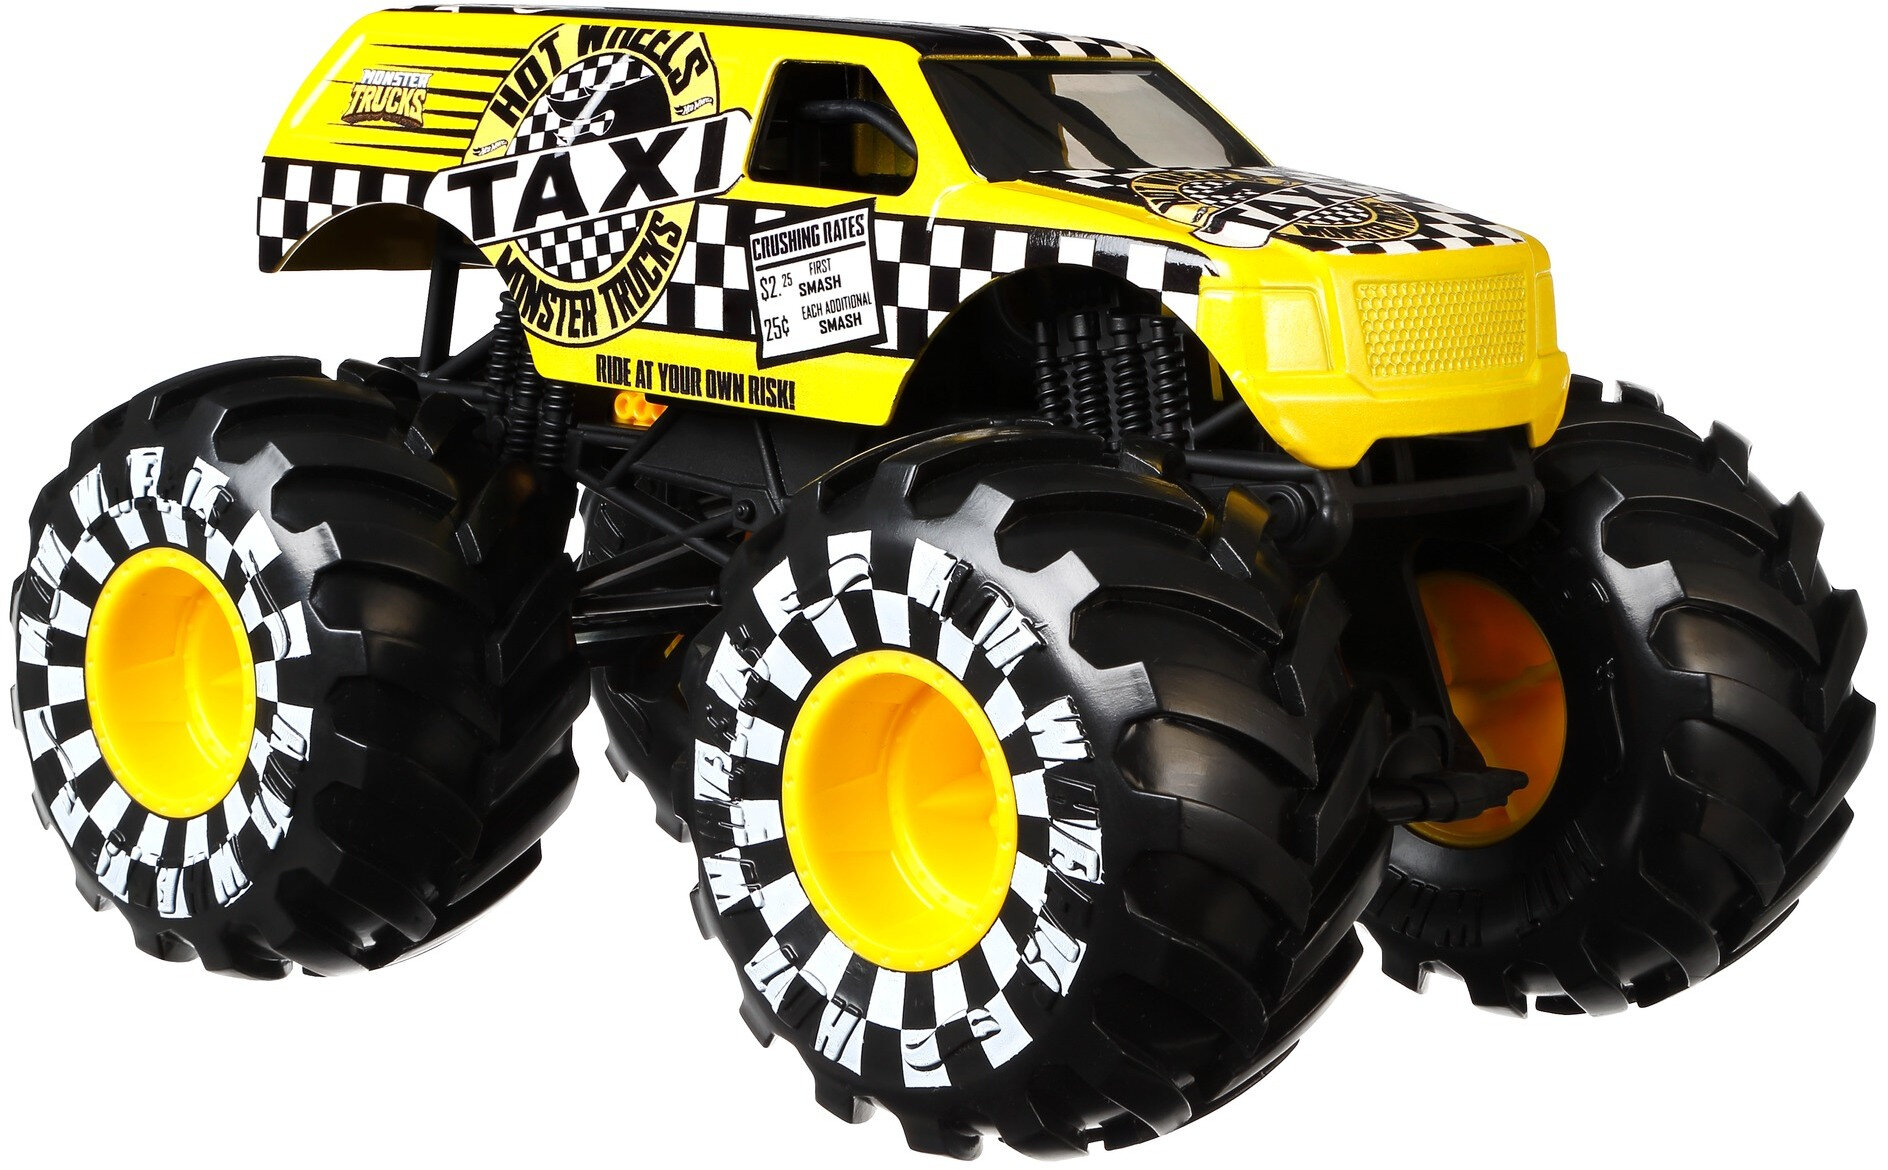 Hot Wheels Monster Trucks Taxi 1:24 Scale Vehicle - image 1 of 5